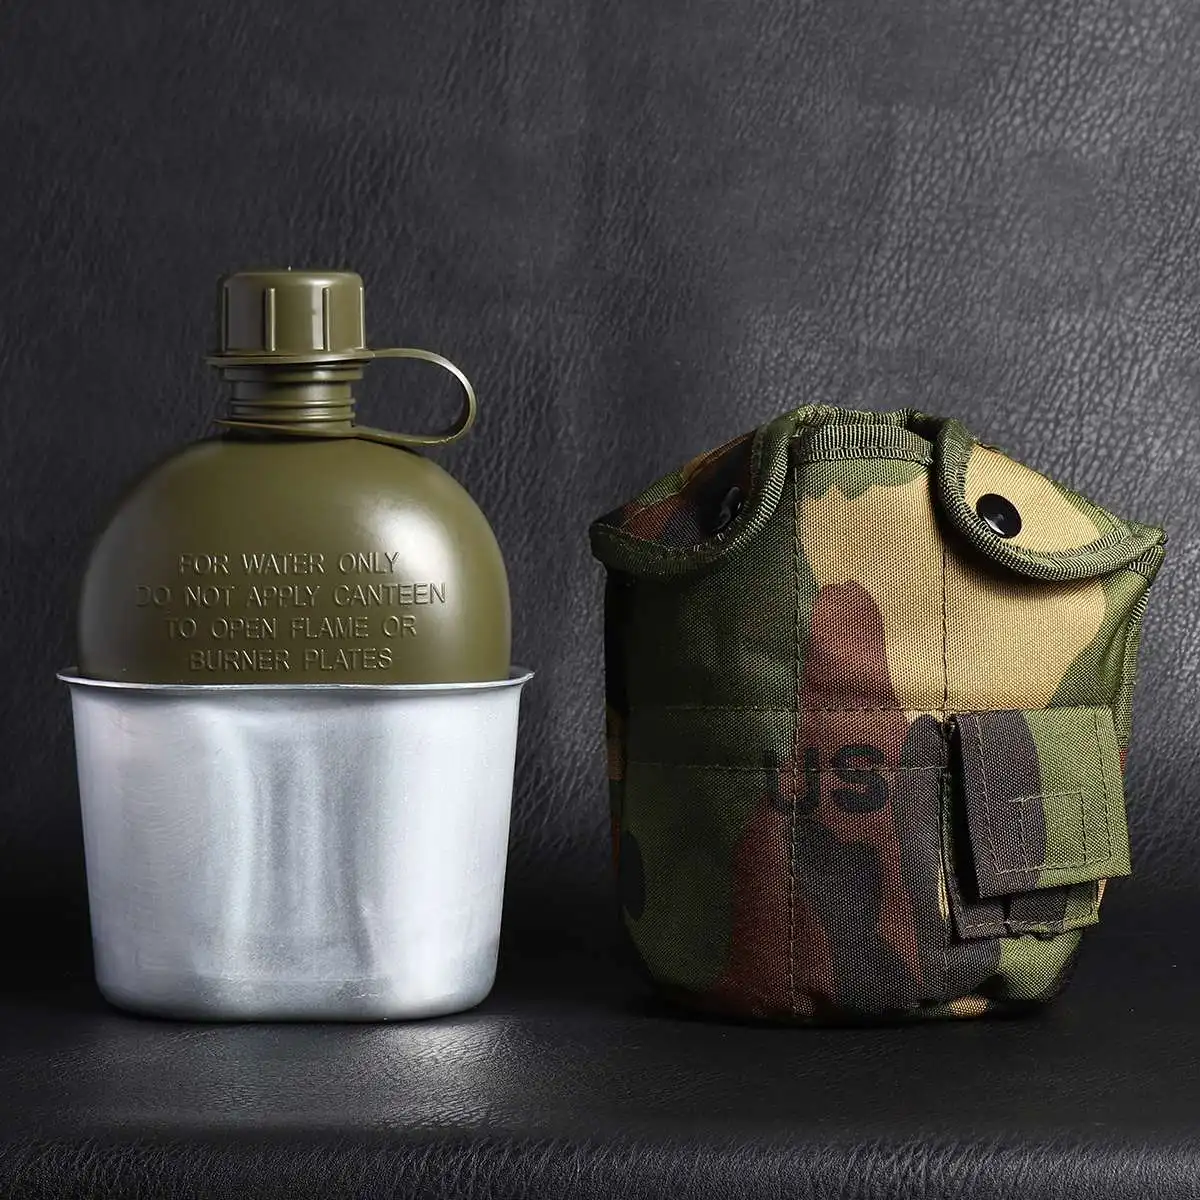 Outdoor 1L Military Camping Army Water Bottle With Pouch Tactical Gear Pouch for Camping Hiking Survival Climbing Accessories